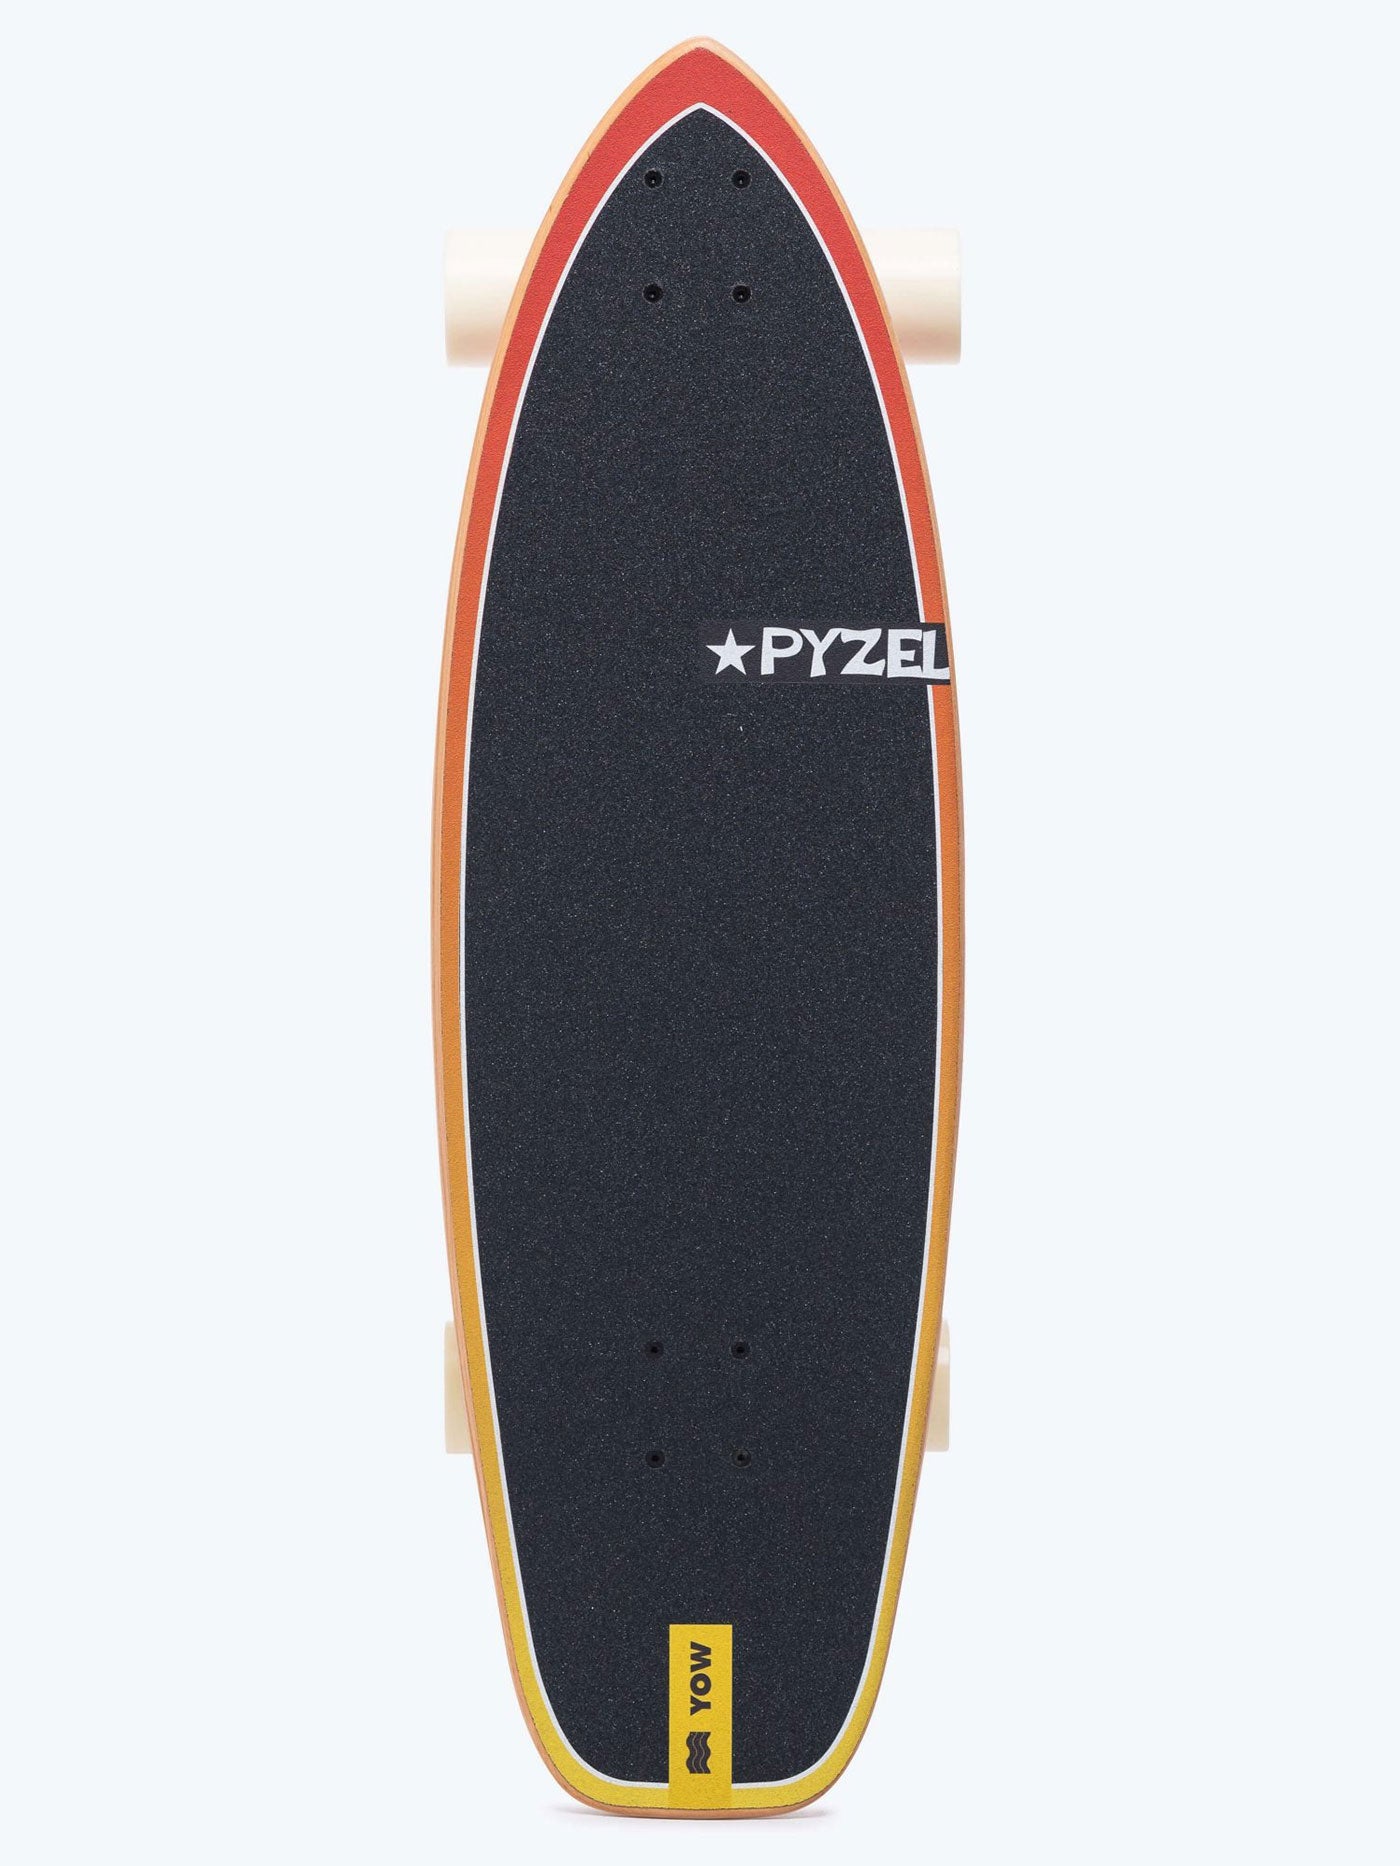 Yow Pyzel Ghost 33.5" Complete Cruiser